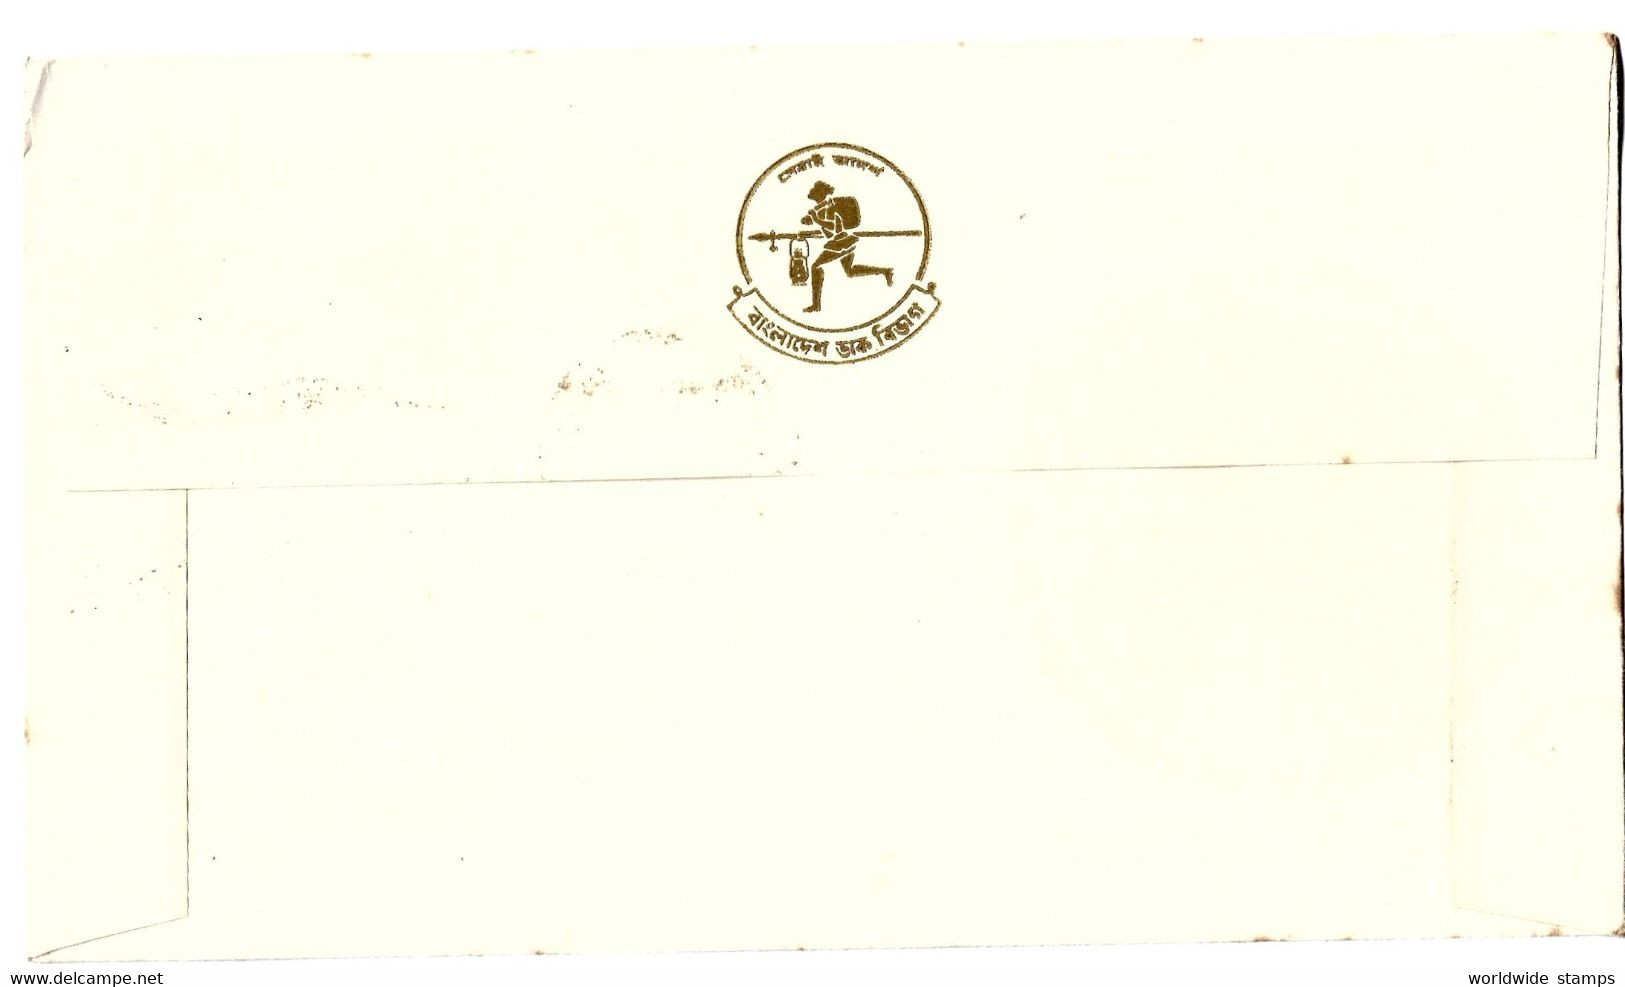 BANGLADESH 1974 FDC FIRST POPULATION CENSUS, MAN, WOMAN, CHILD, GIRL, BOY, FAMILY, MAP, FIRST DAY COVER - Bangladesch